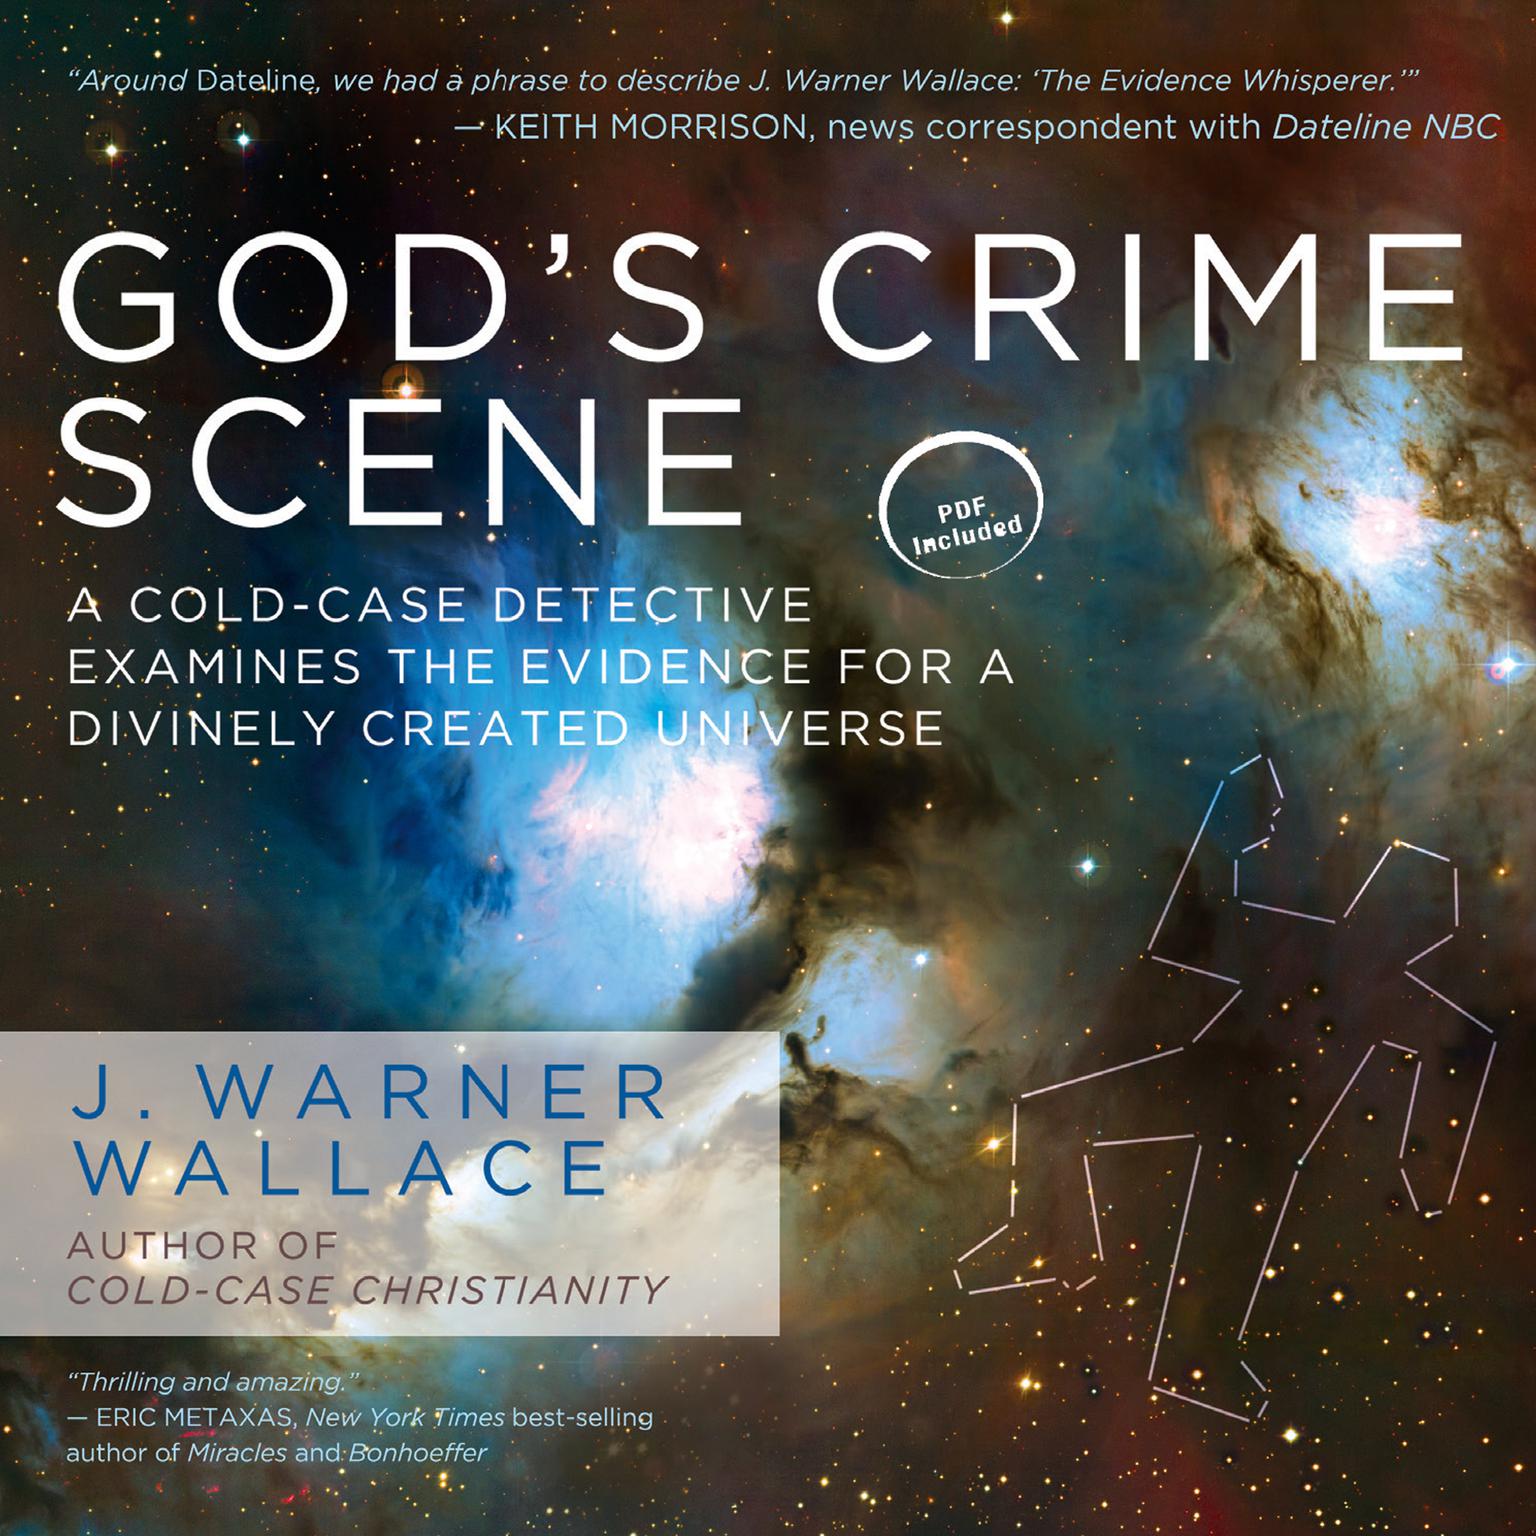 Gods Crime Scene: A Cold-Case Detective Examines the Evidence for a Divinely Created Universe Audiobook, by J. Warner Wallace